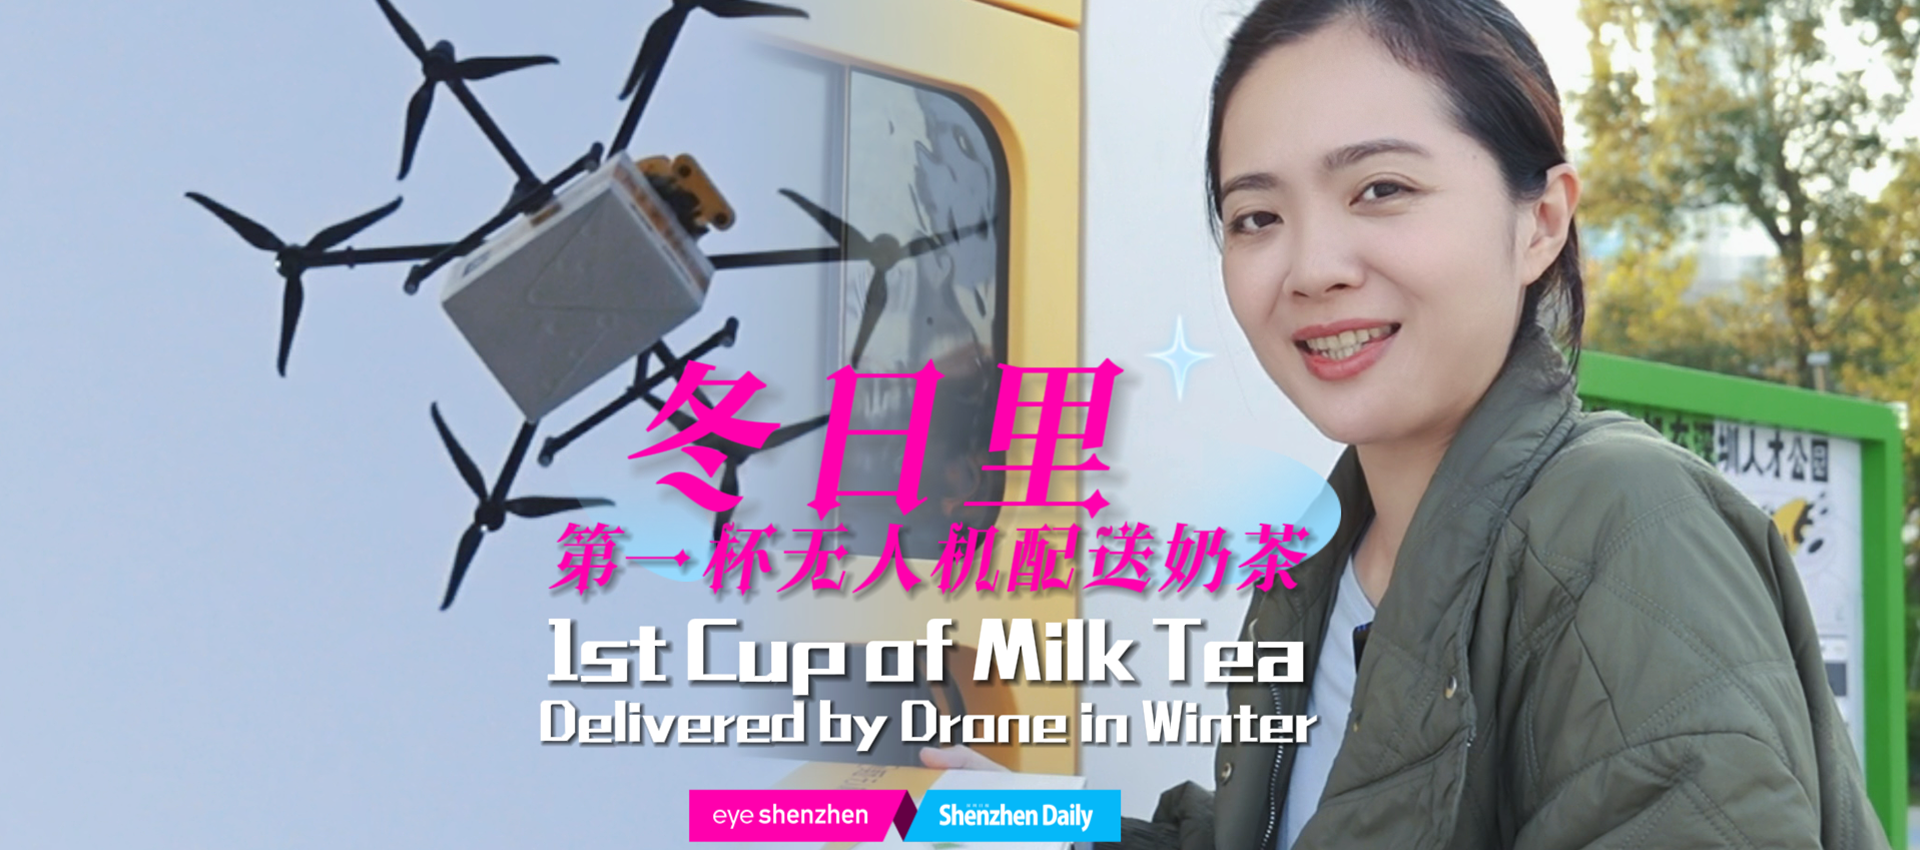 Enjoy a cup of drone-delivered milk tea in SZ